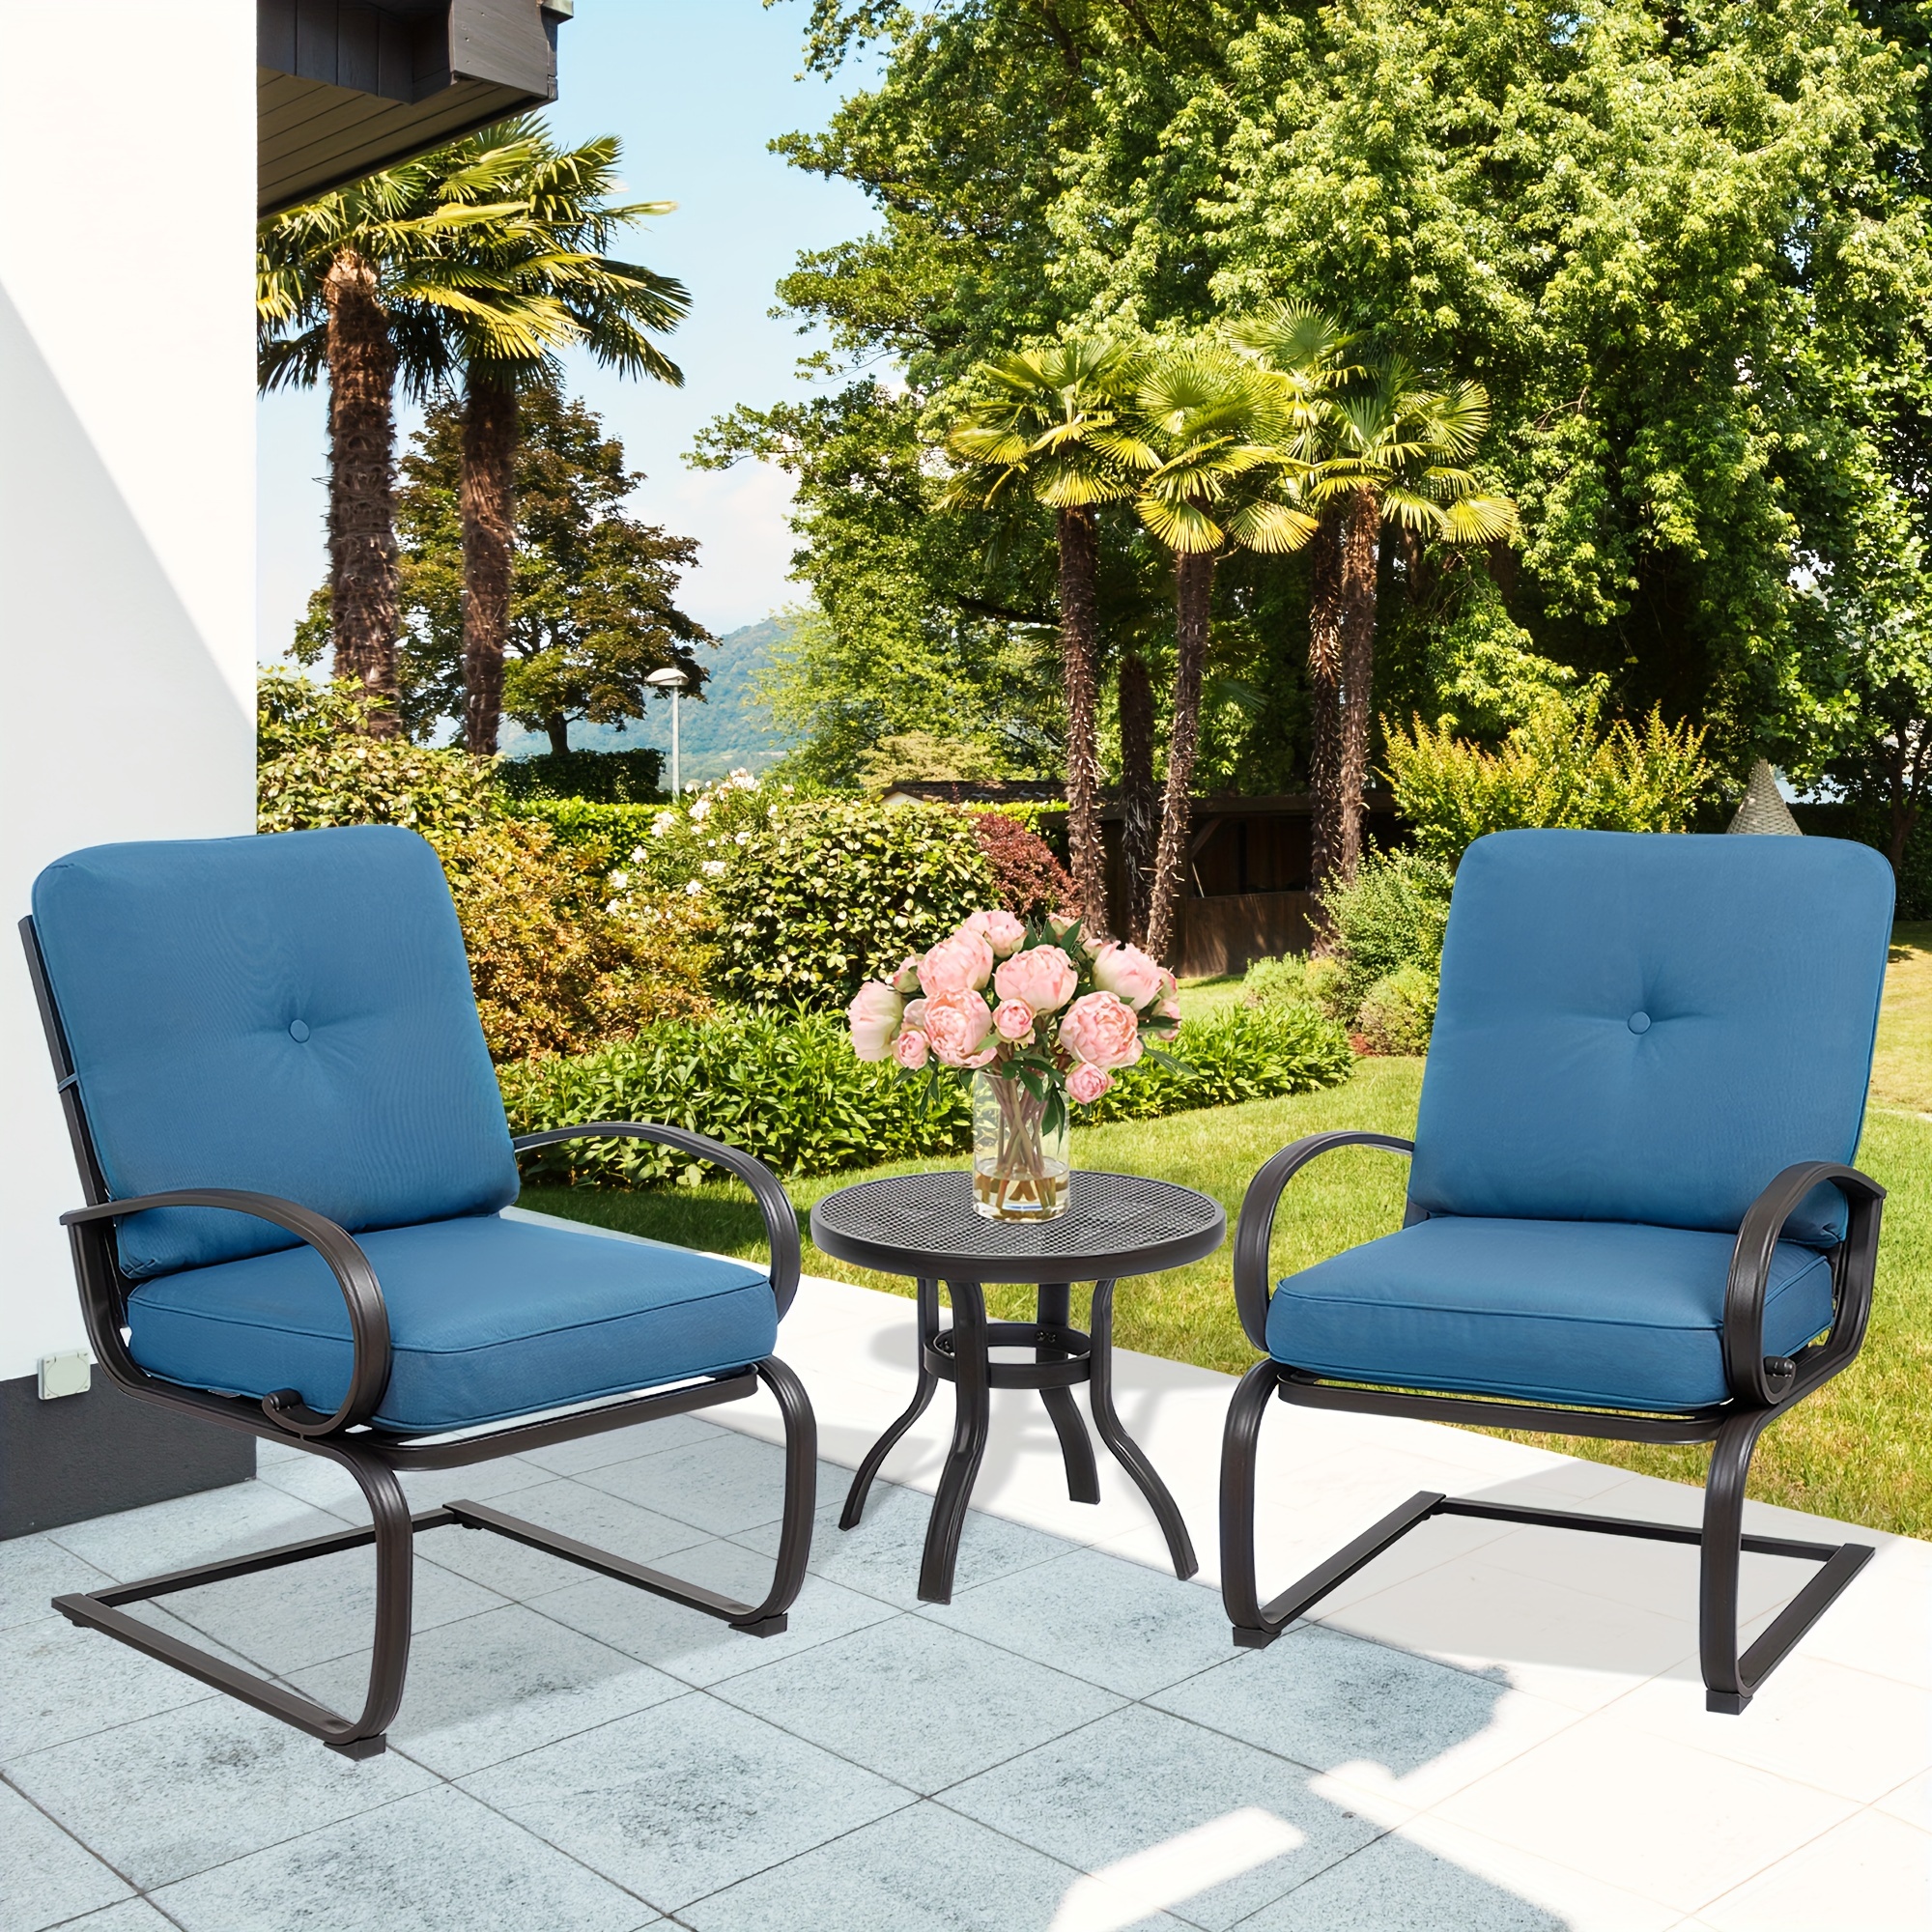 

3pcs Outdoor Patio Bistro Set Springs Motion Chairs And Round Table Set, Indoor Steel Frame Conversation Furniture Set With Cushions